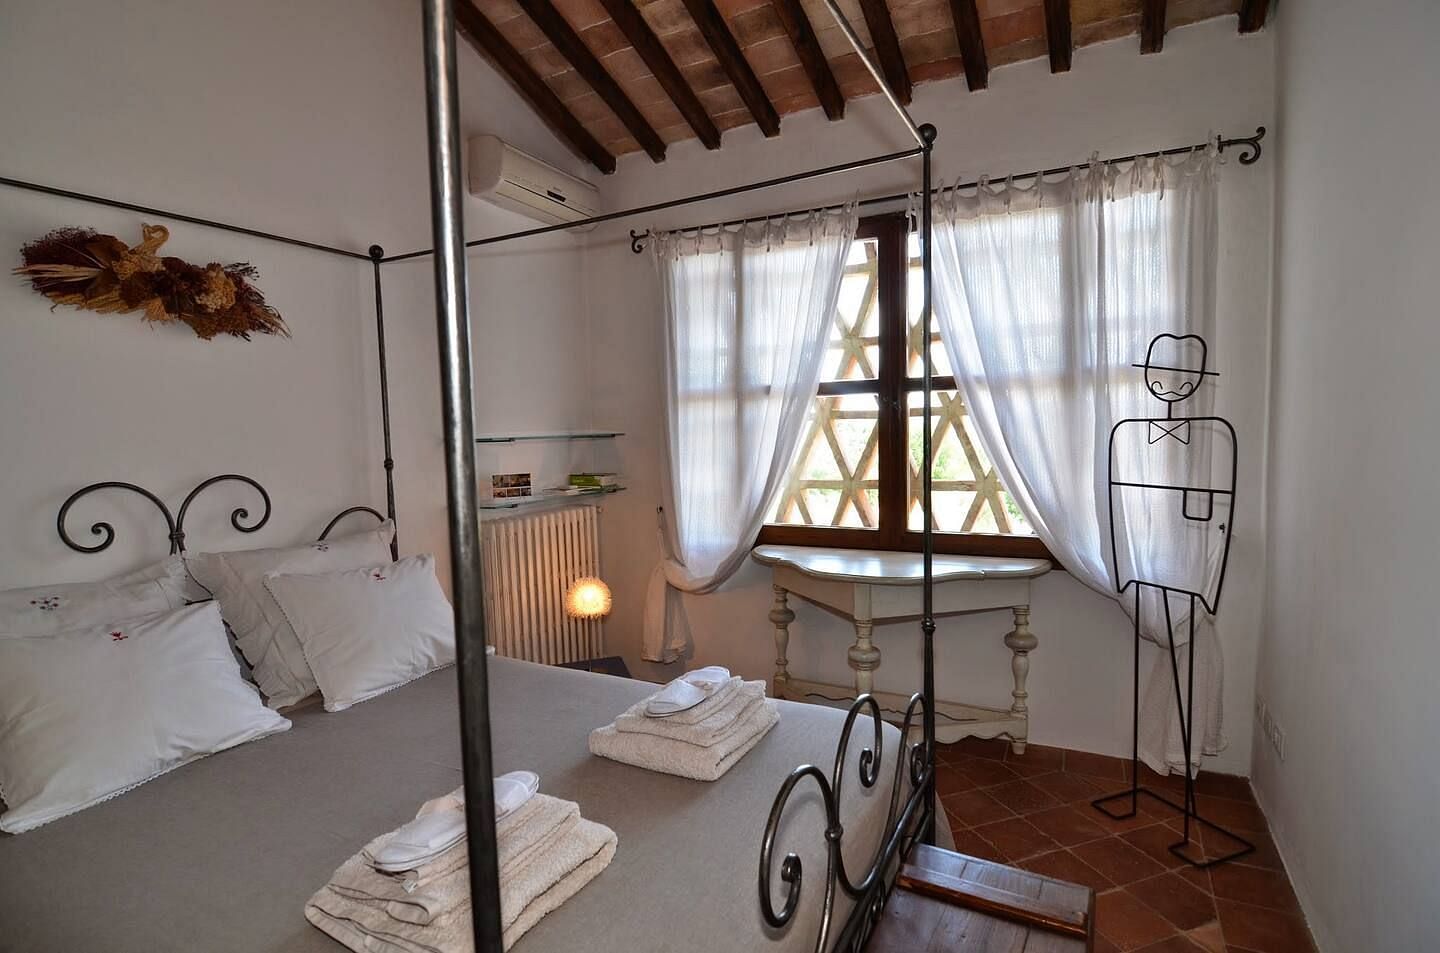 JWguest Bed and Breakfast at Tavarnelle, Toscana | The Barn under the Tuscan countryside | Jwbnb no brobnb 2